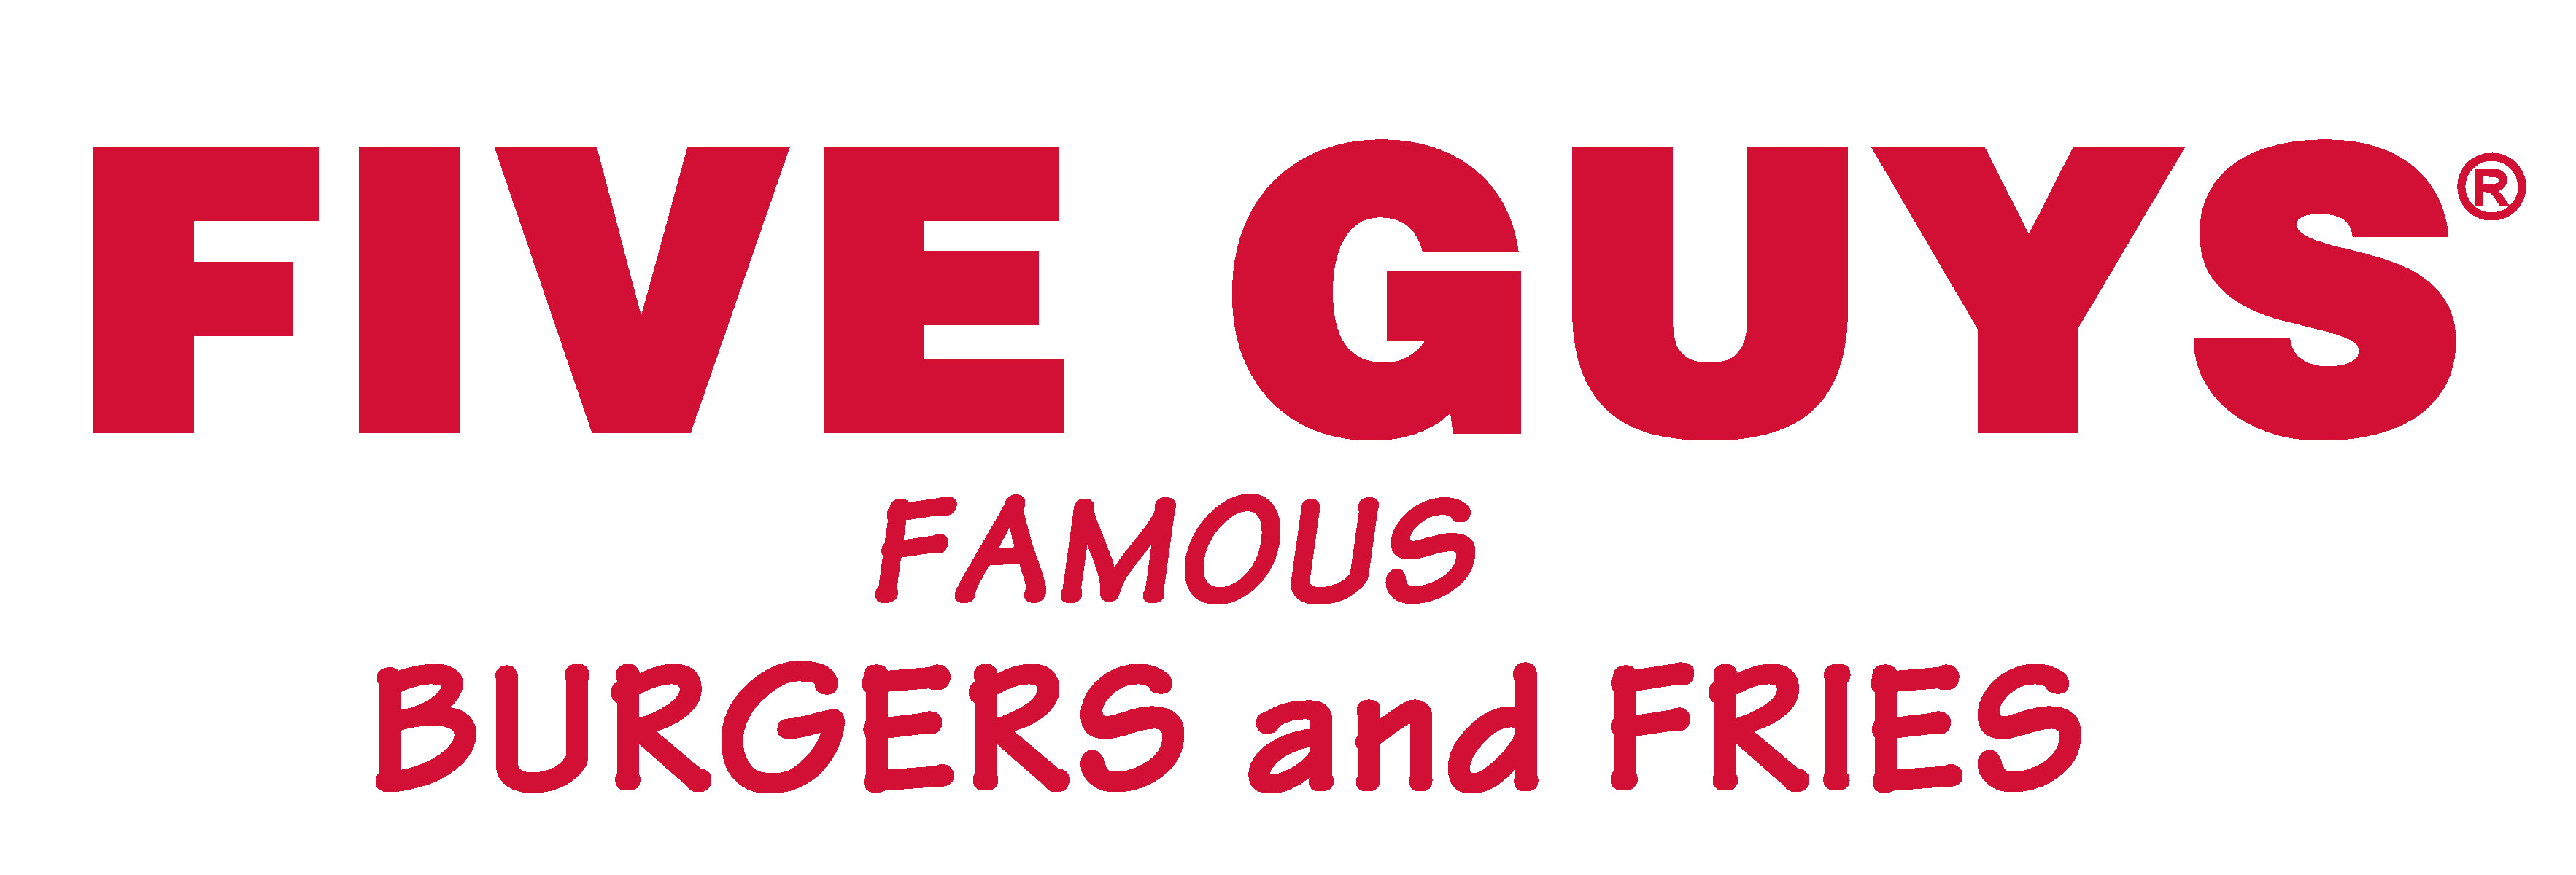 Five Guys Out at Nationals Park - Burger Days - A Never-Ending Quest to